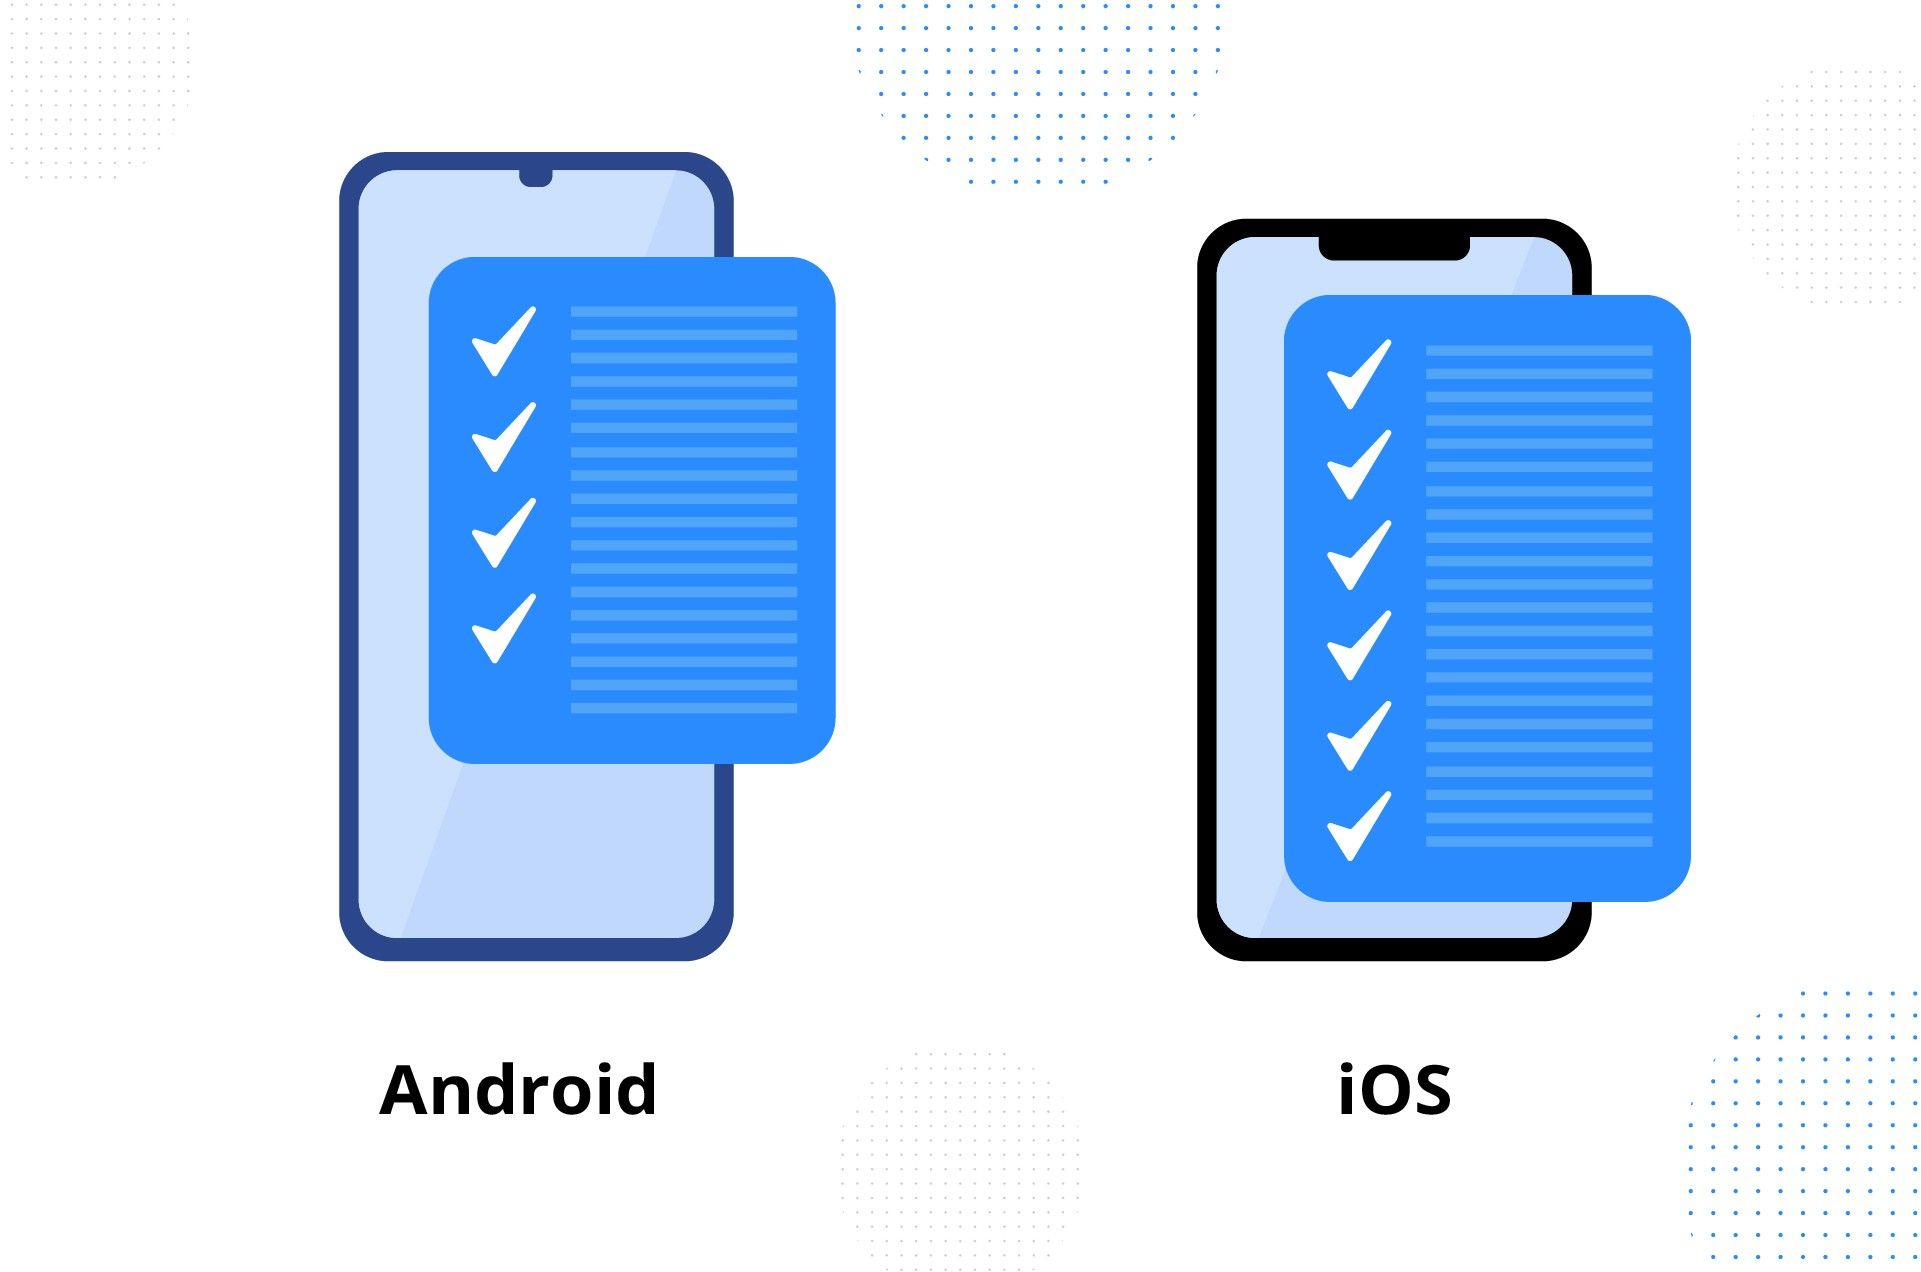 iOS vs Android release issues